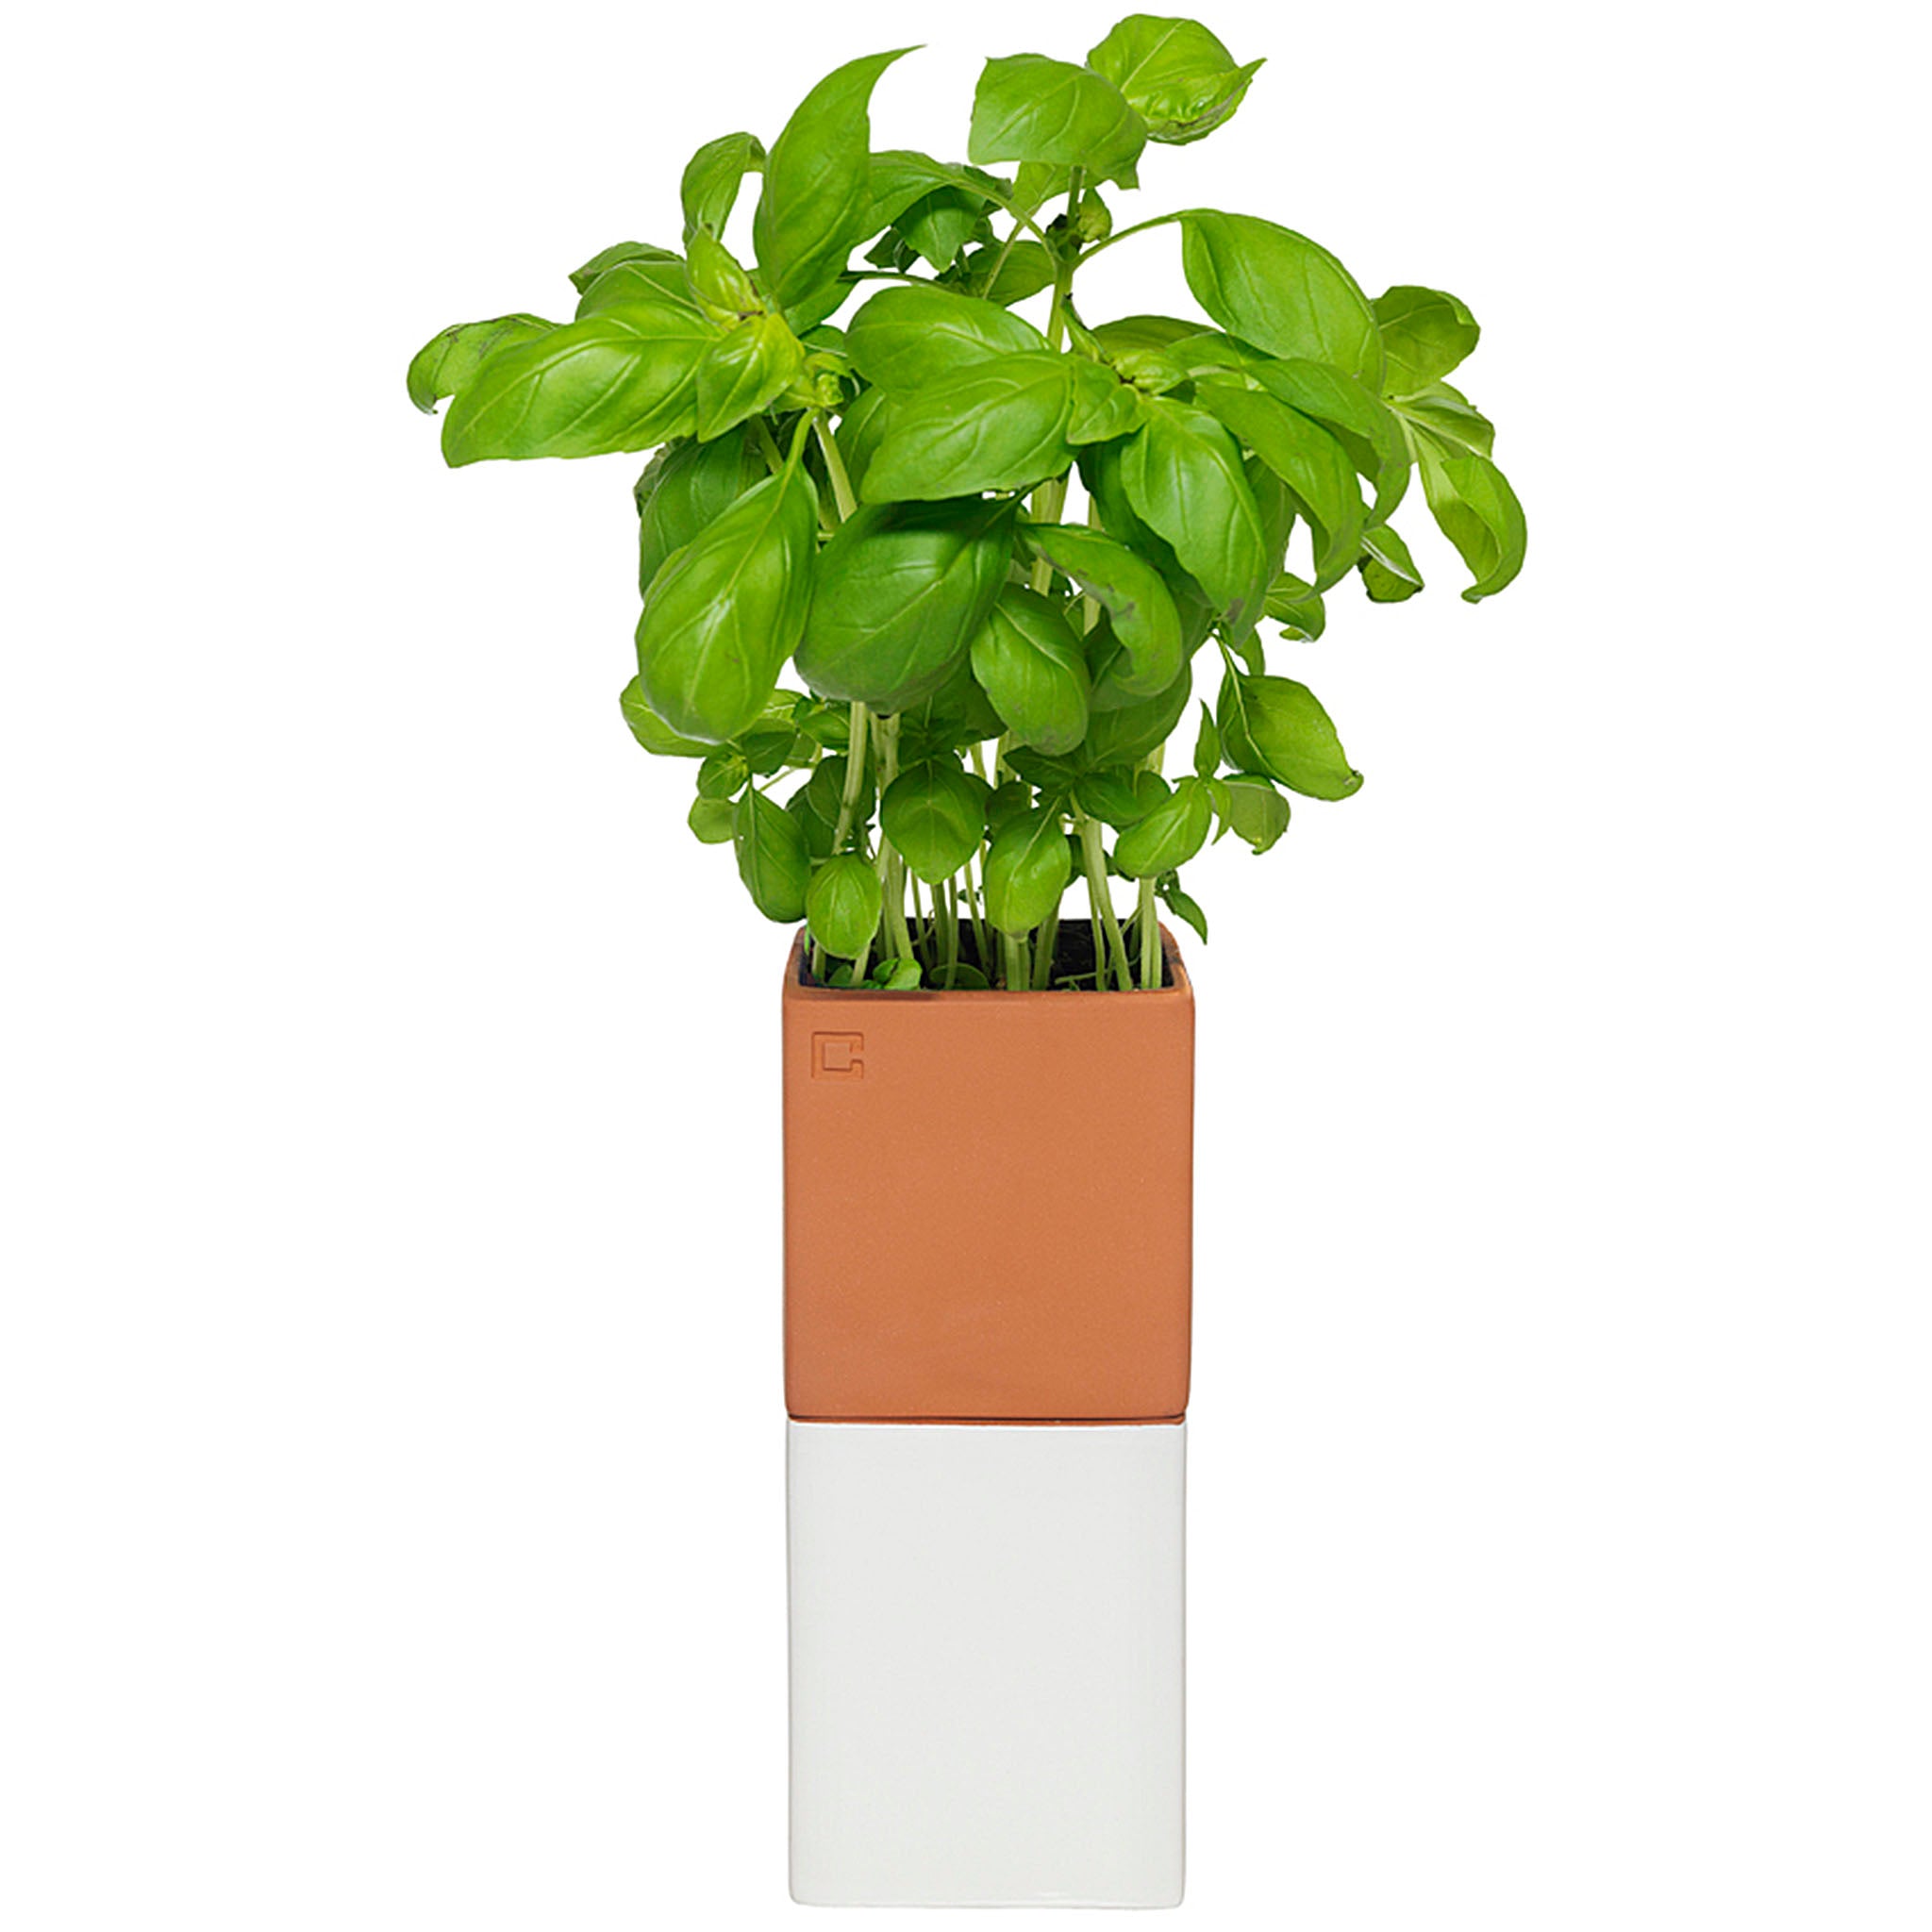 Evergreen is a self-watering pot which is ideal for anyone who doesn’t have a green thumb or who has other priorities. The Evergreen is designed to keep herbs fresher and more delicious in just a few days. 